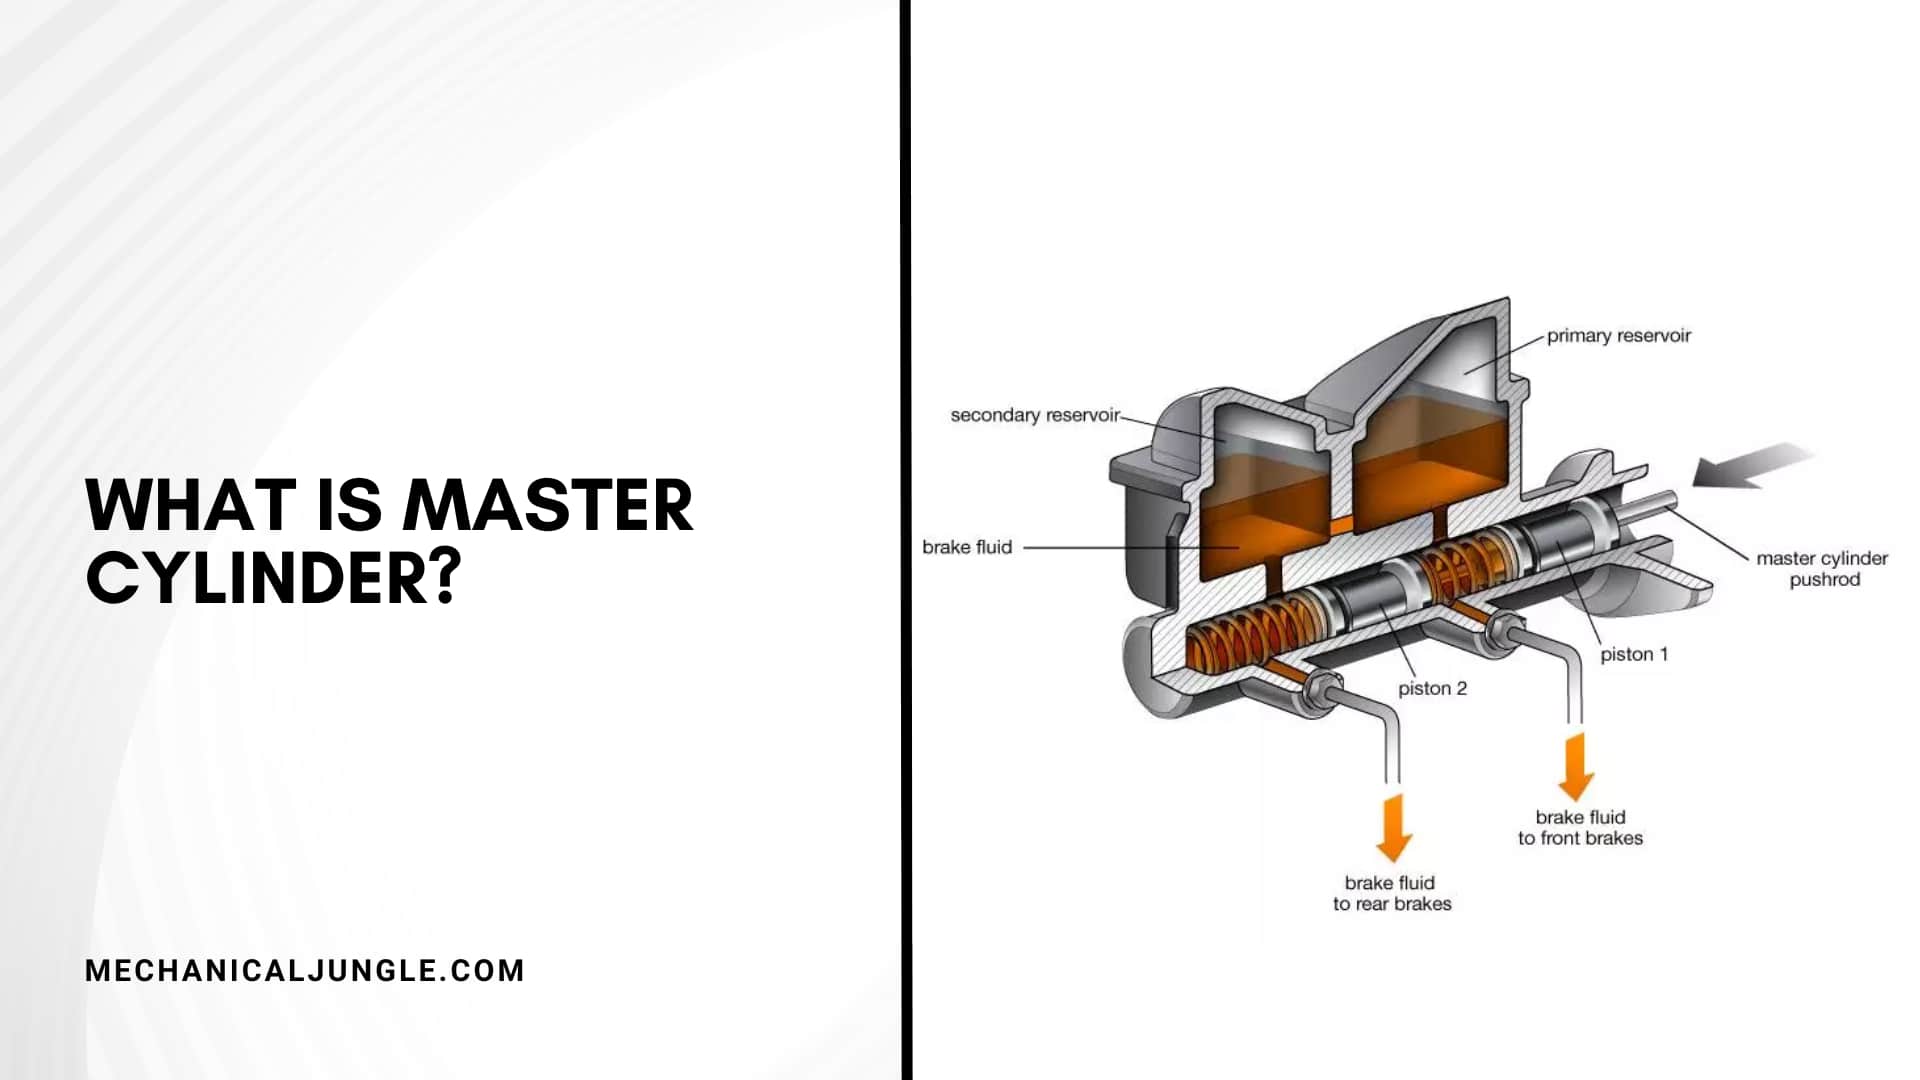 What Is Master Cylinder?